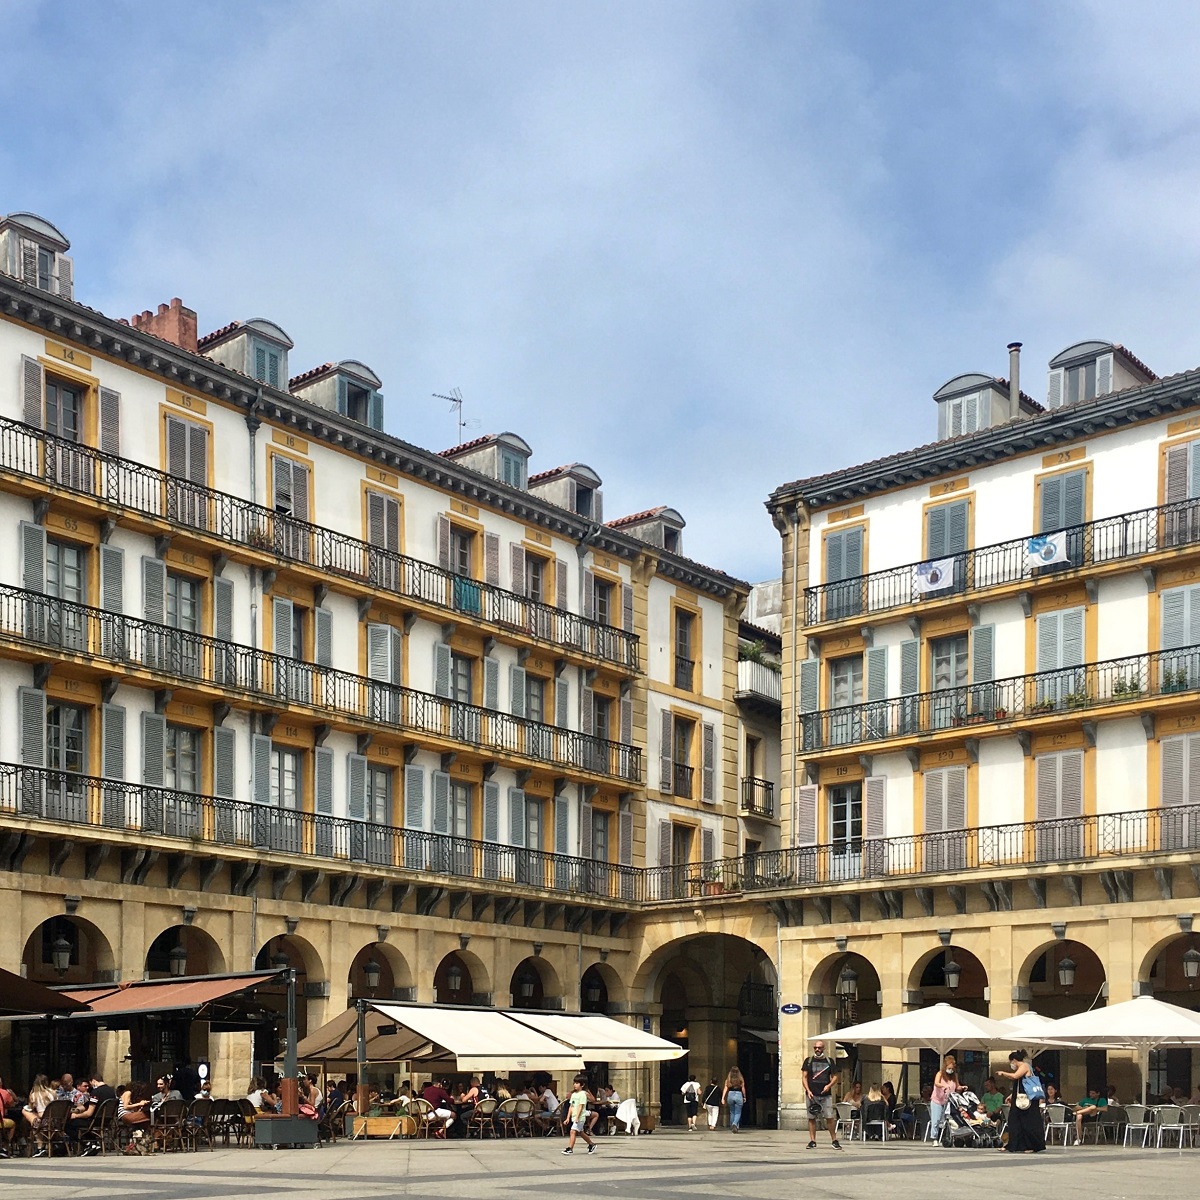 San Sebastian's old town with columns, umbrellas, and outdoor bars